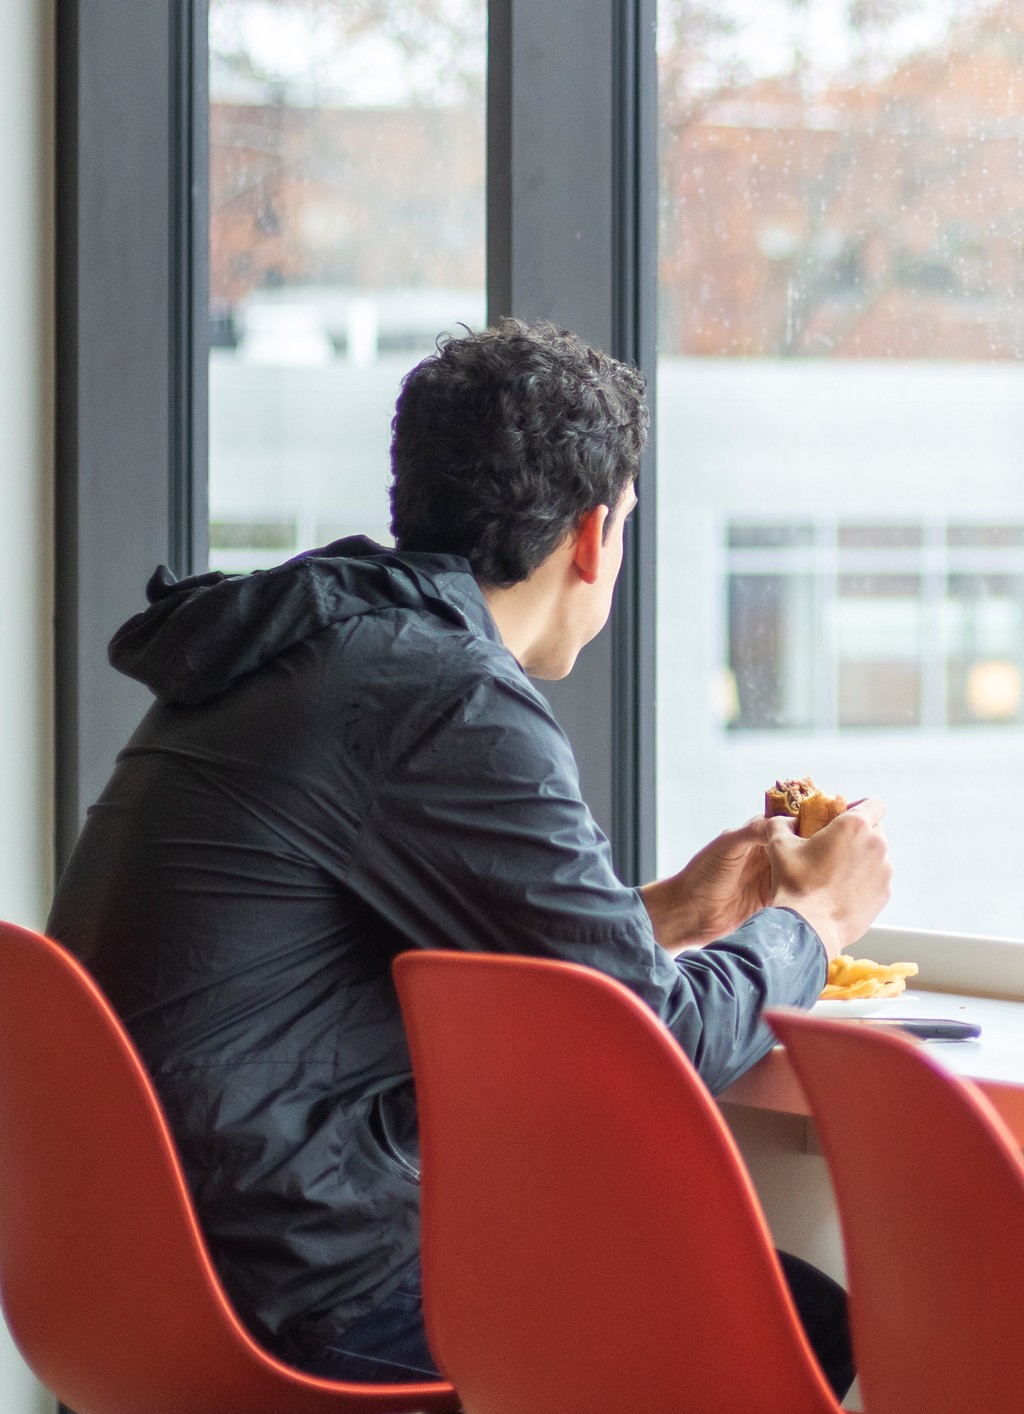 A student eating a hamburger while looking out large glass windows